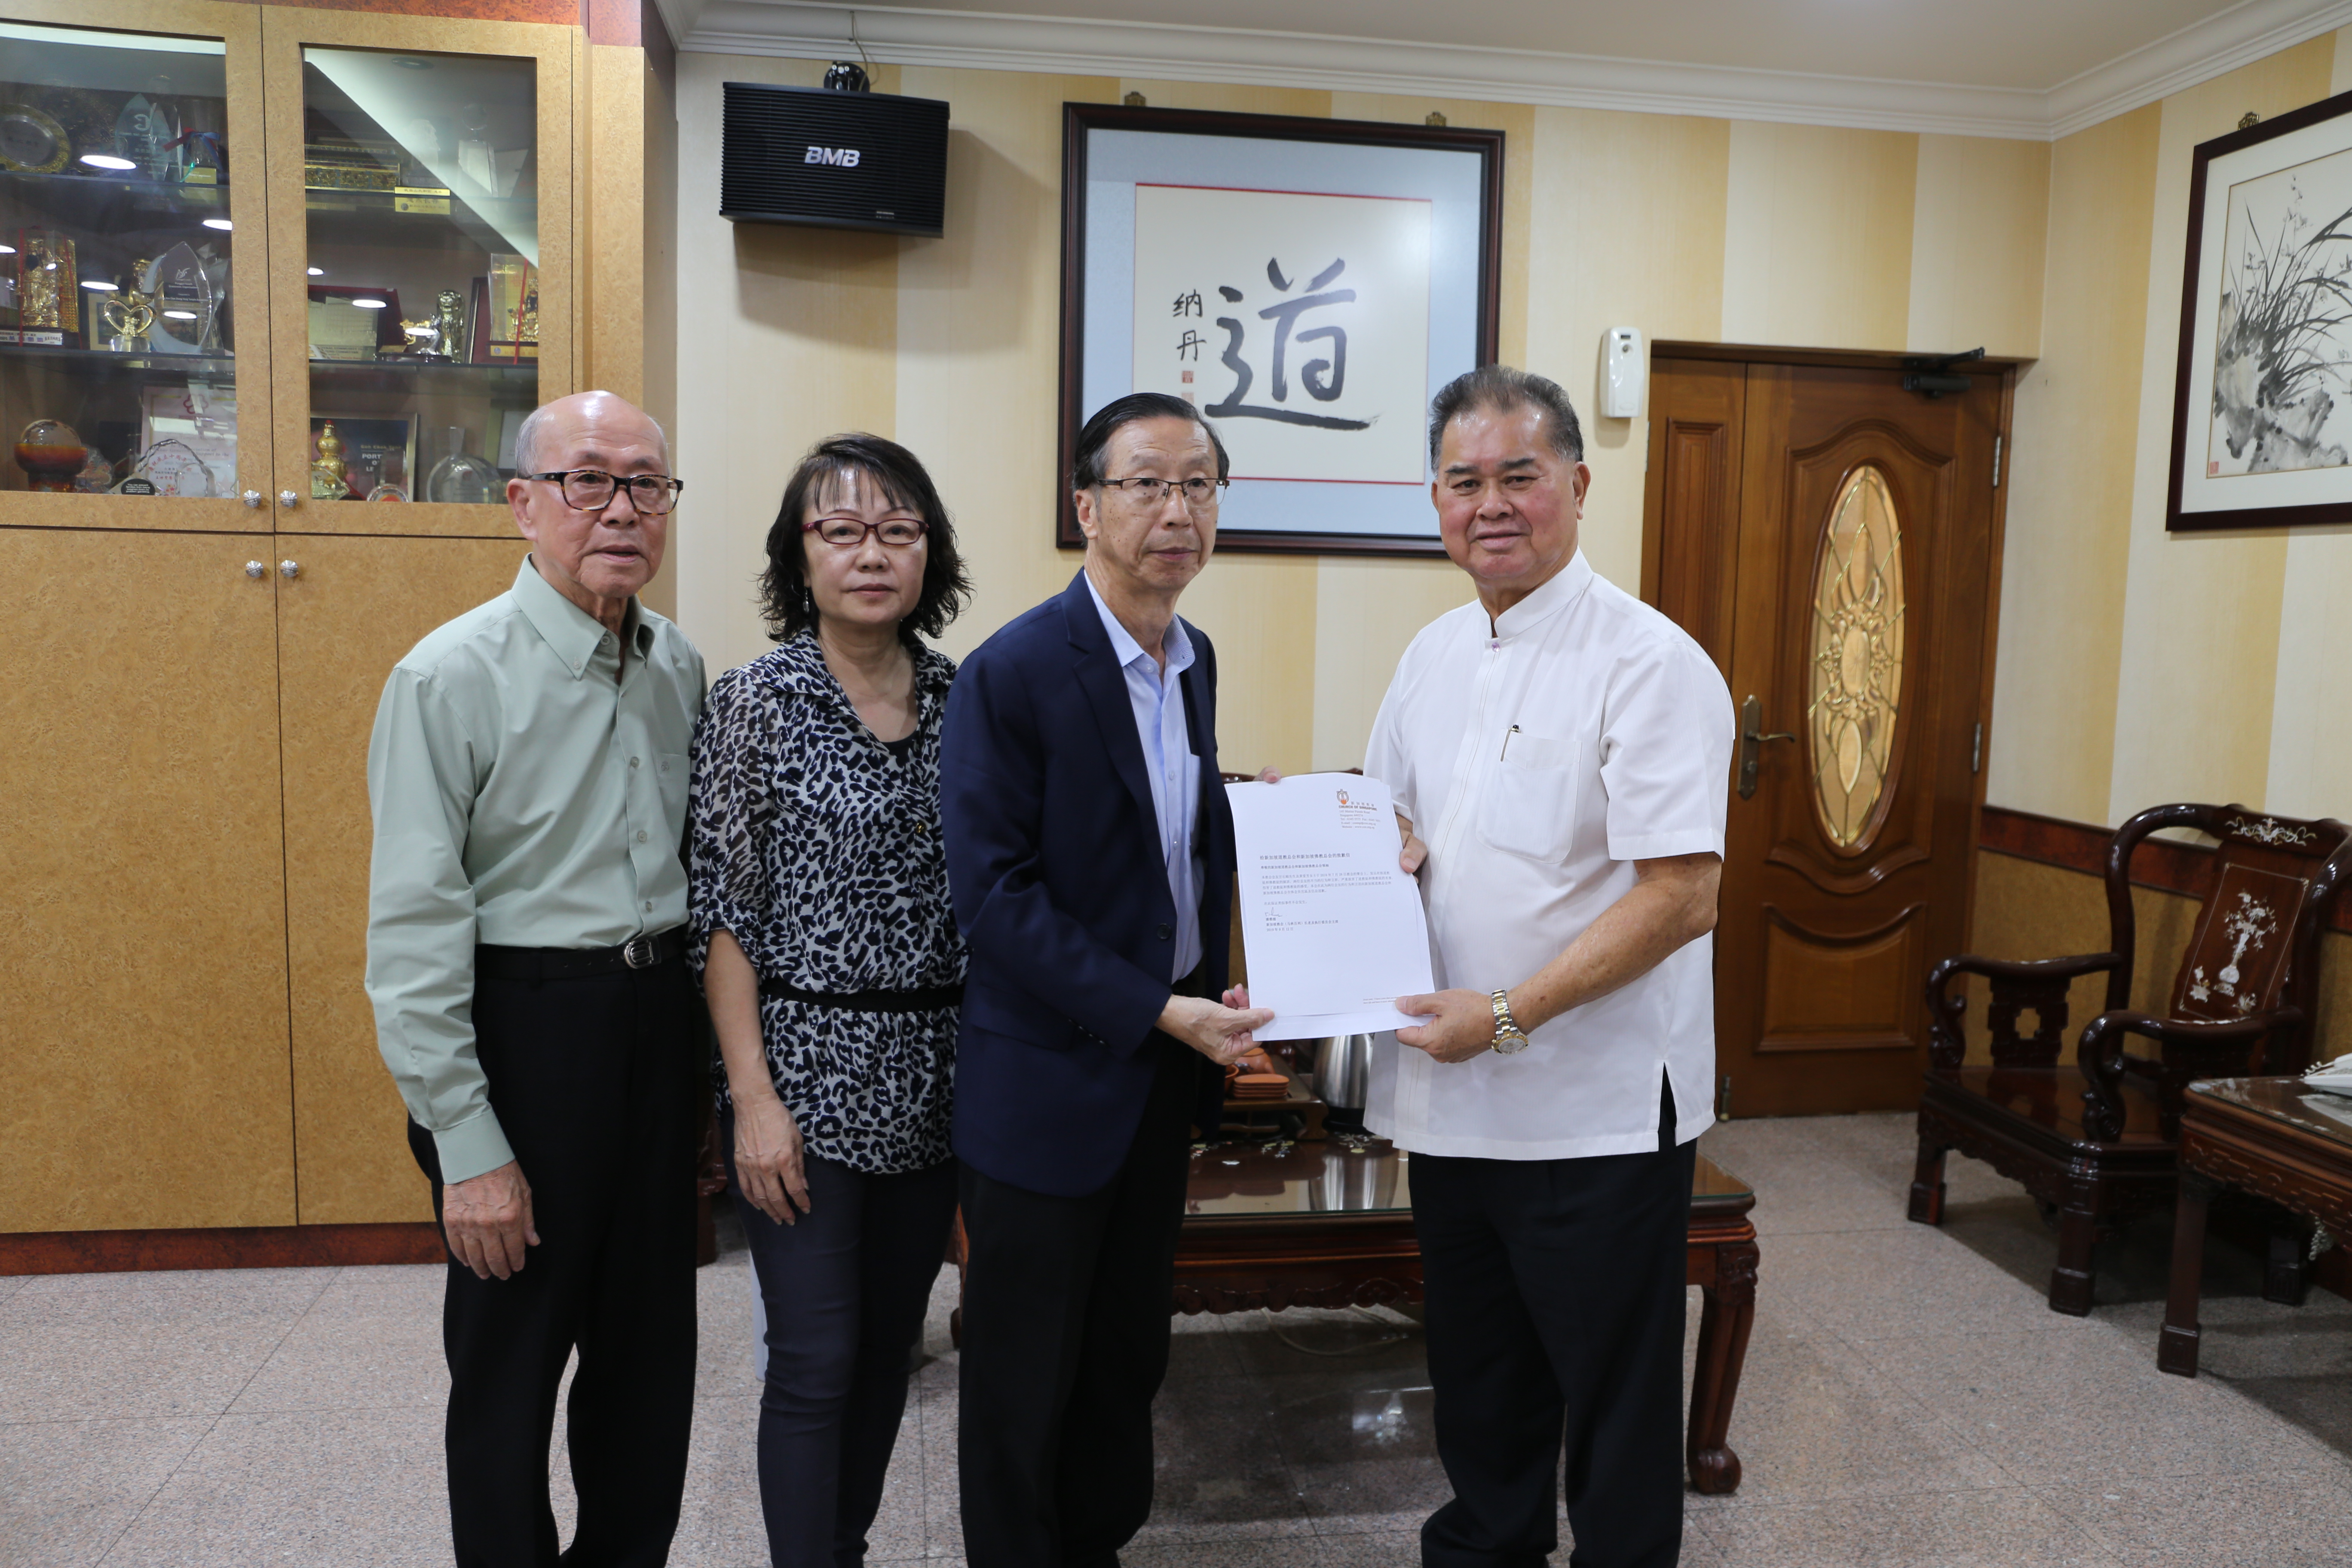 Two members from the Church of Singapore apologized to the Taoist Federation